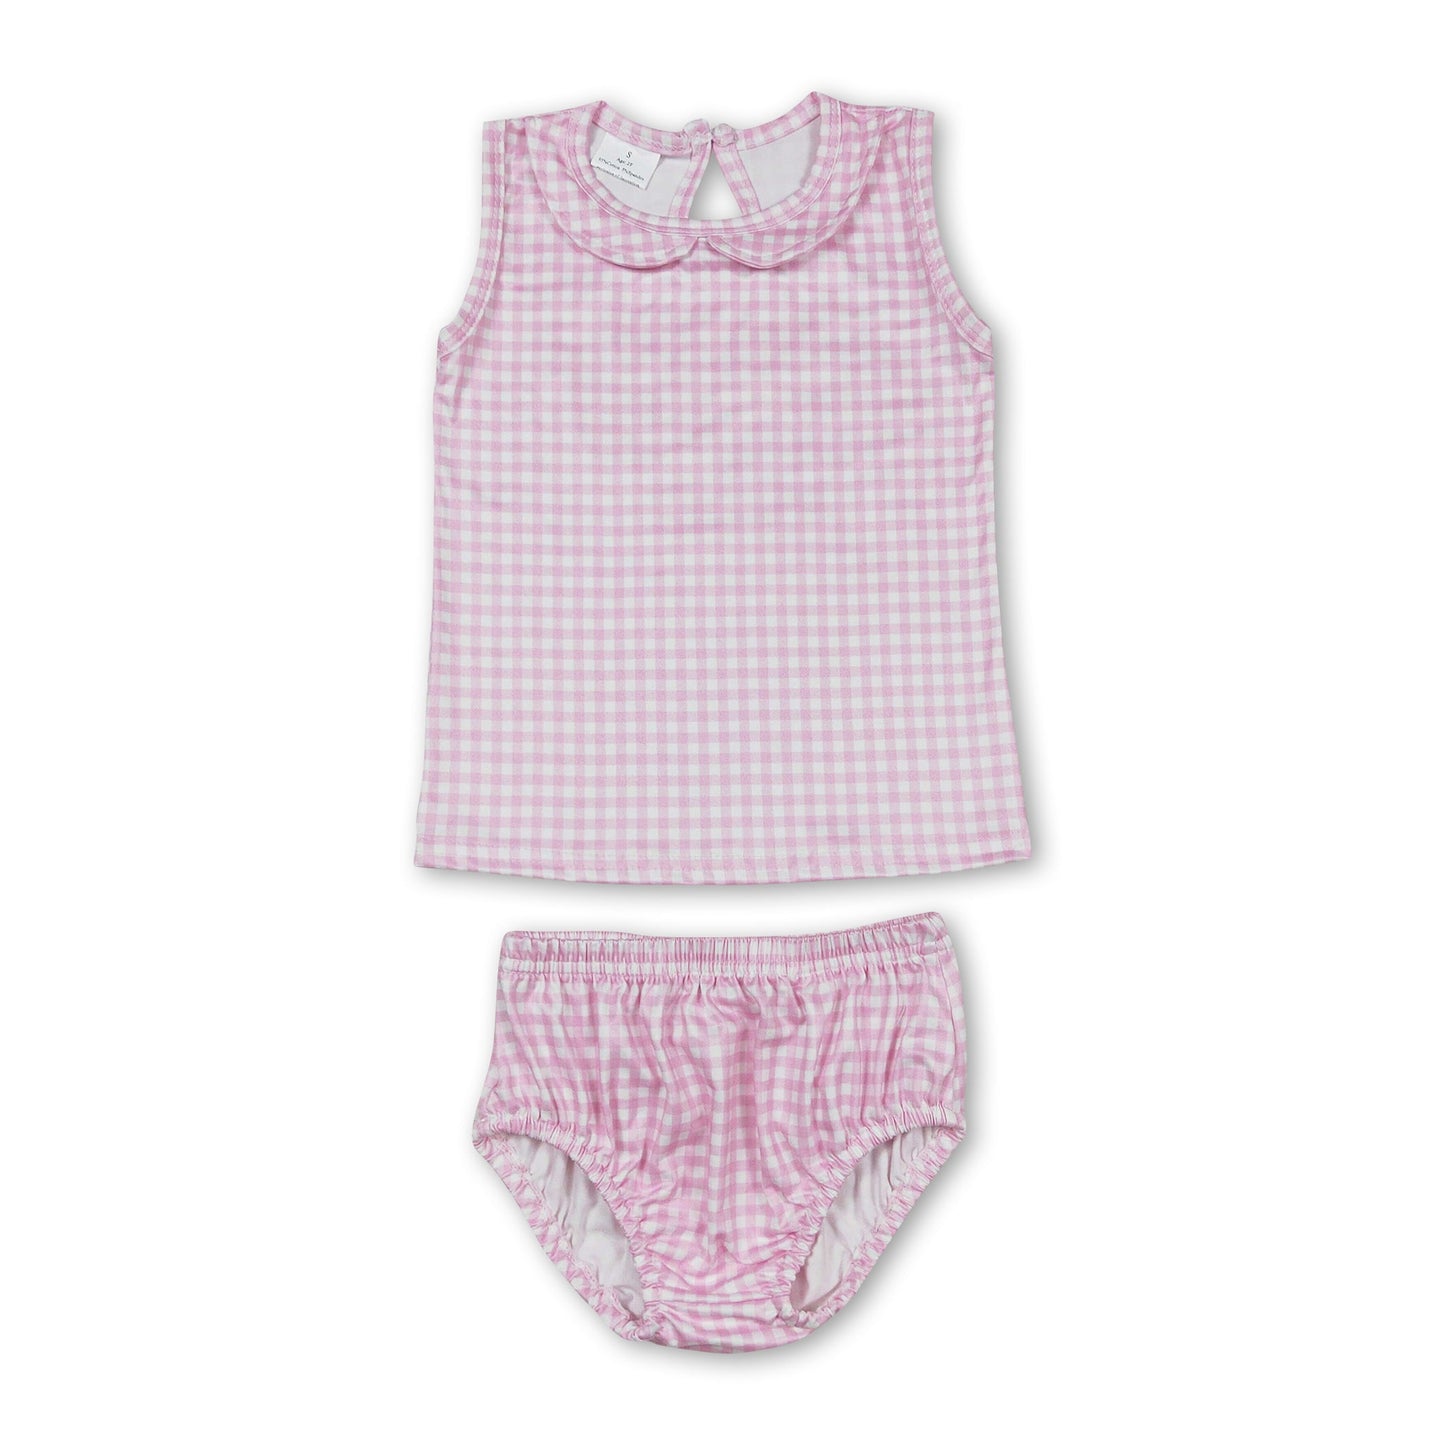 Sleeveless pink plaid top bummies baby girls clothes